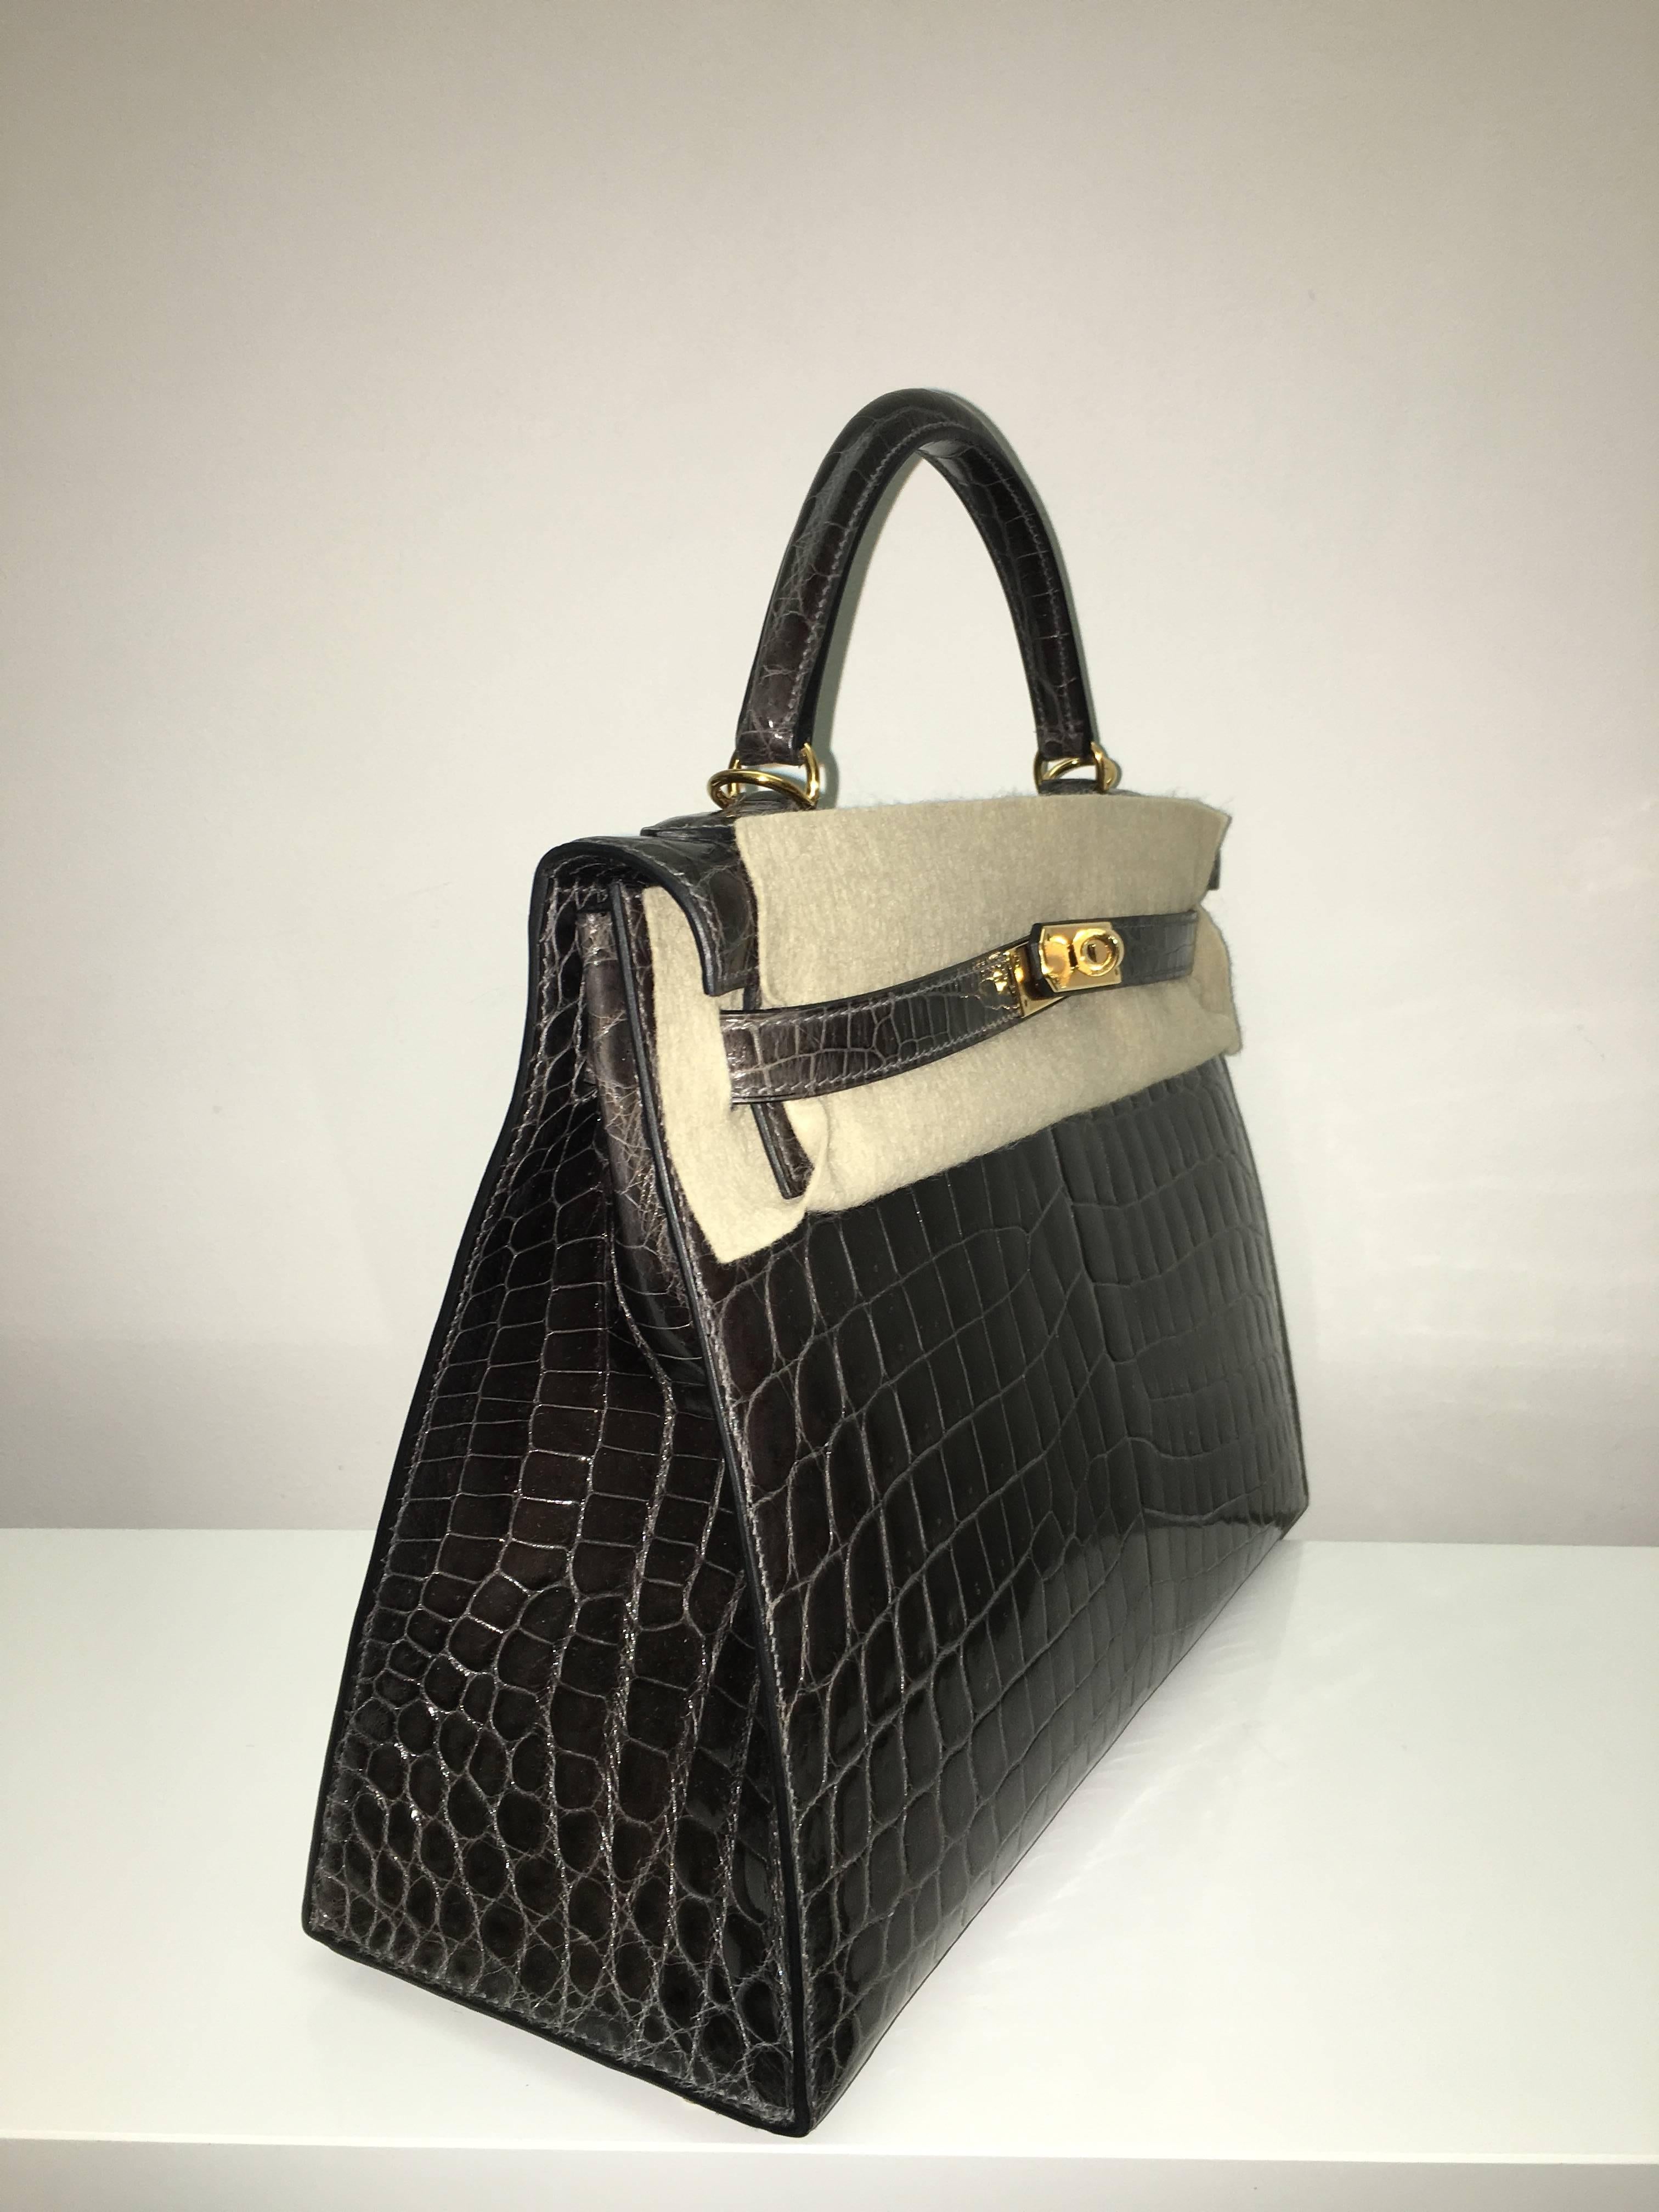 Hermes 
Kelly Size 32
Shiny Croc Leather 
Colour Graphite
Gold Hardware 
store fresh, comes with receipt and full set (dust bag, box...) 
Hydeparkfashion specializes in sourcing and delivering authentic luxury handbags, mainly Hermes, to